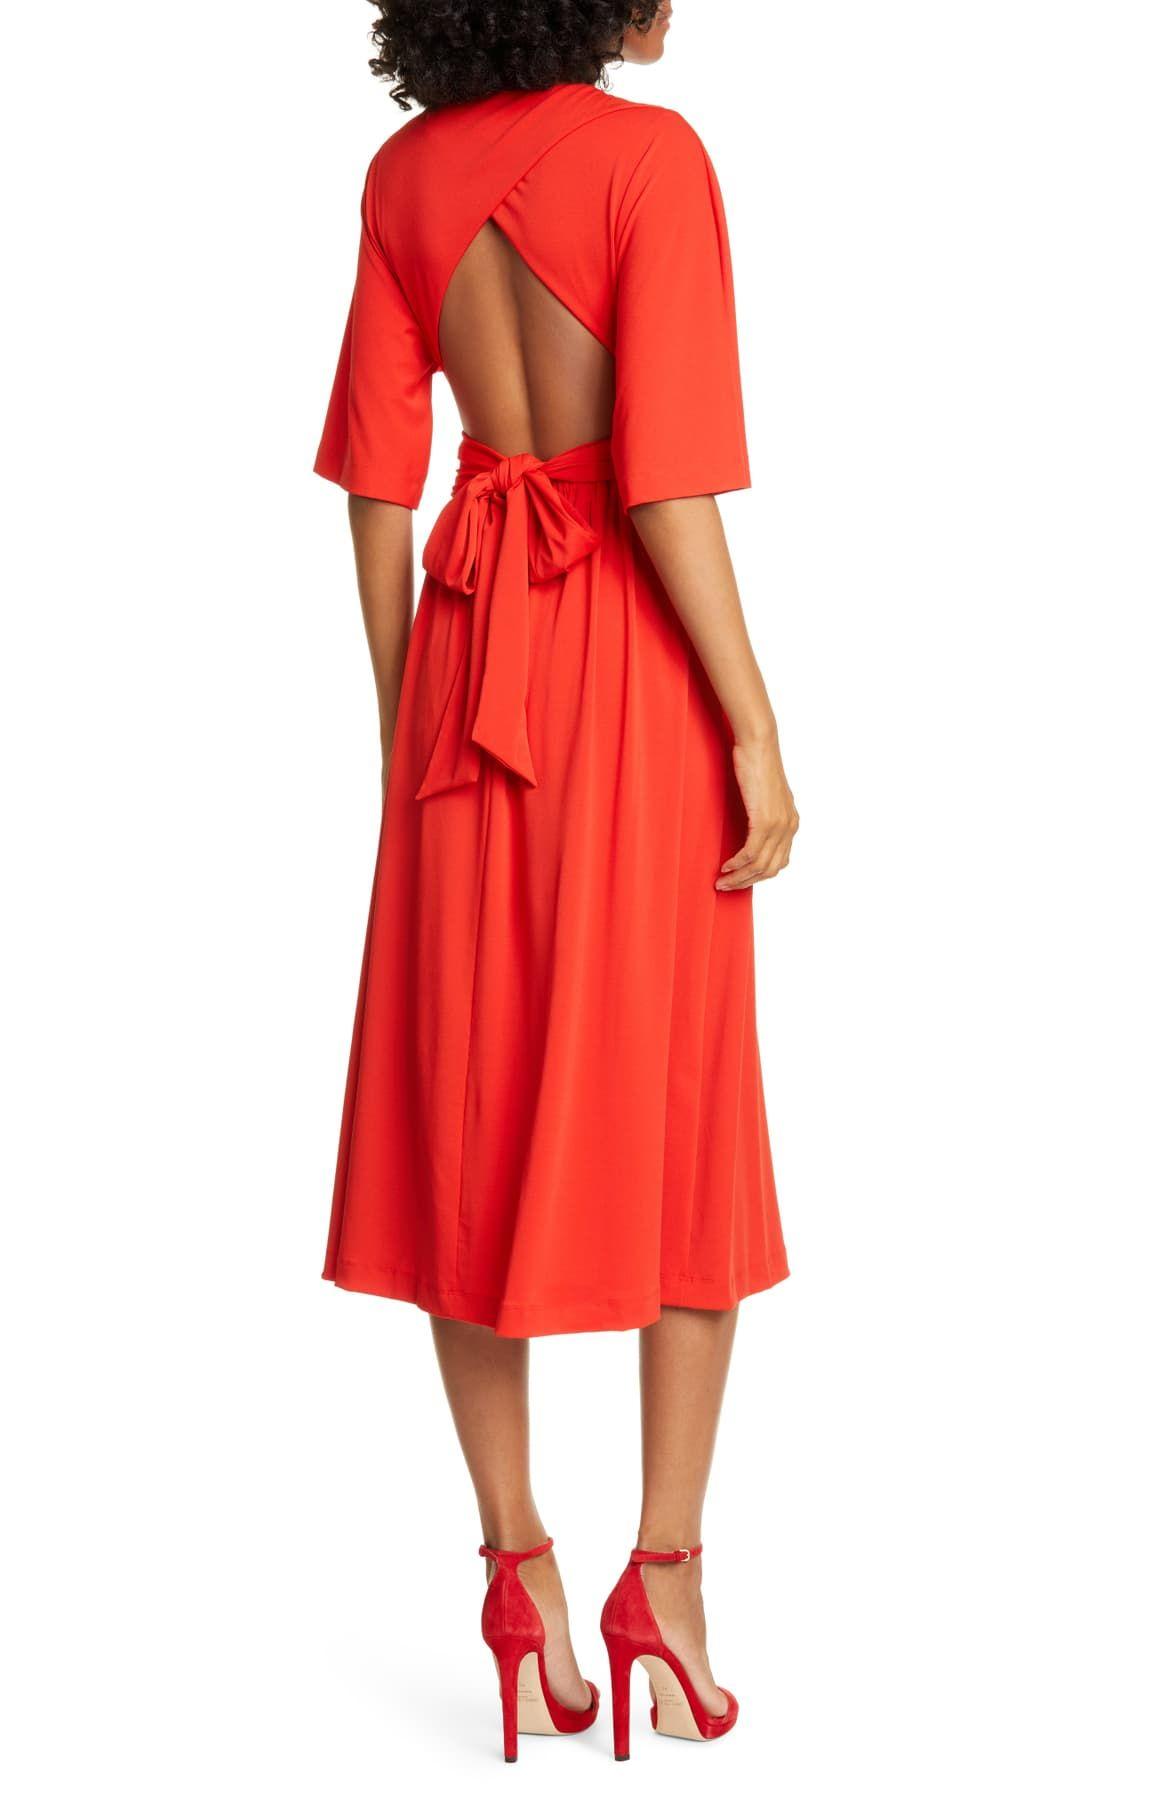 Ted Baker Synthetic Cross Over Wrap Midi Dress in Bright Red (Red) - Lyst